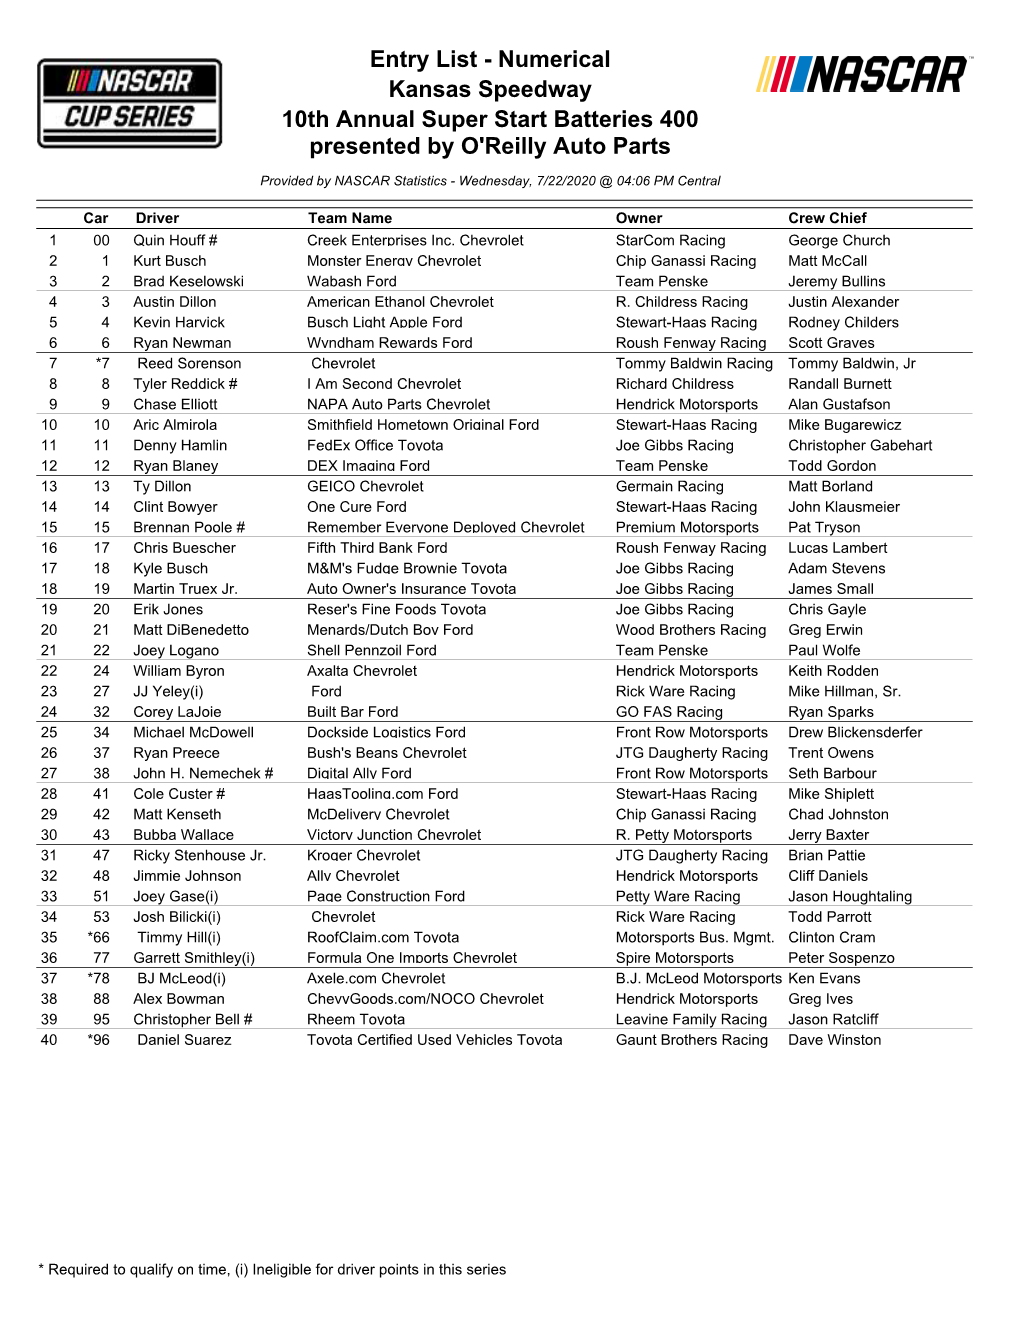 Entry List - Numerical Kansas Speedway 10Th Annual Super Start Batteries 400 Presented by O'reilly Auto Parts